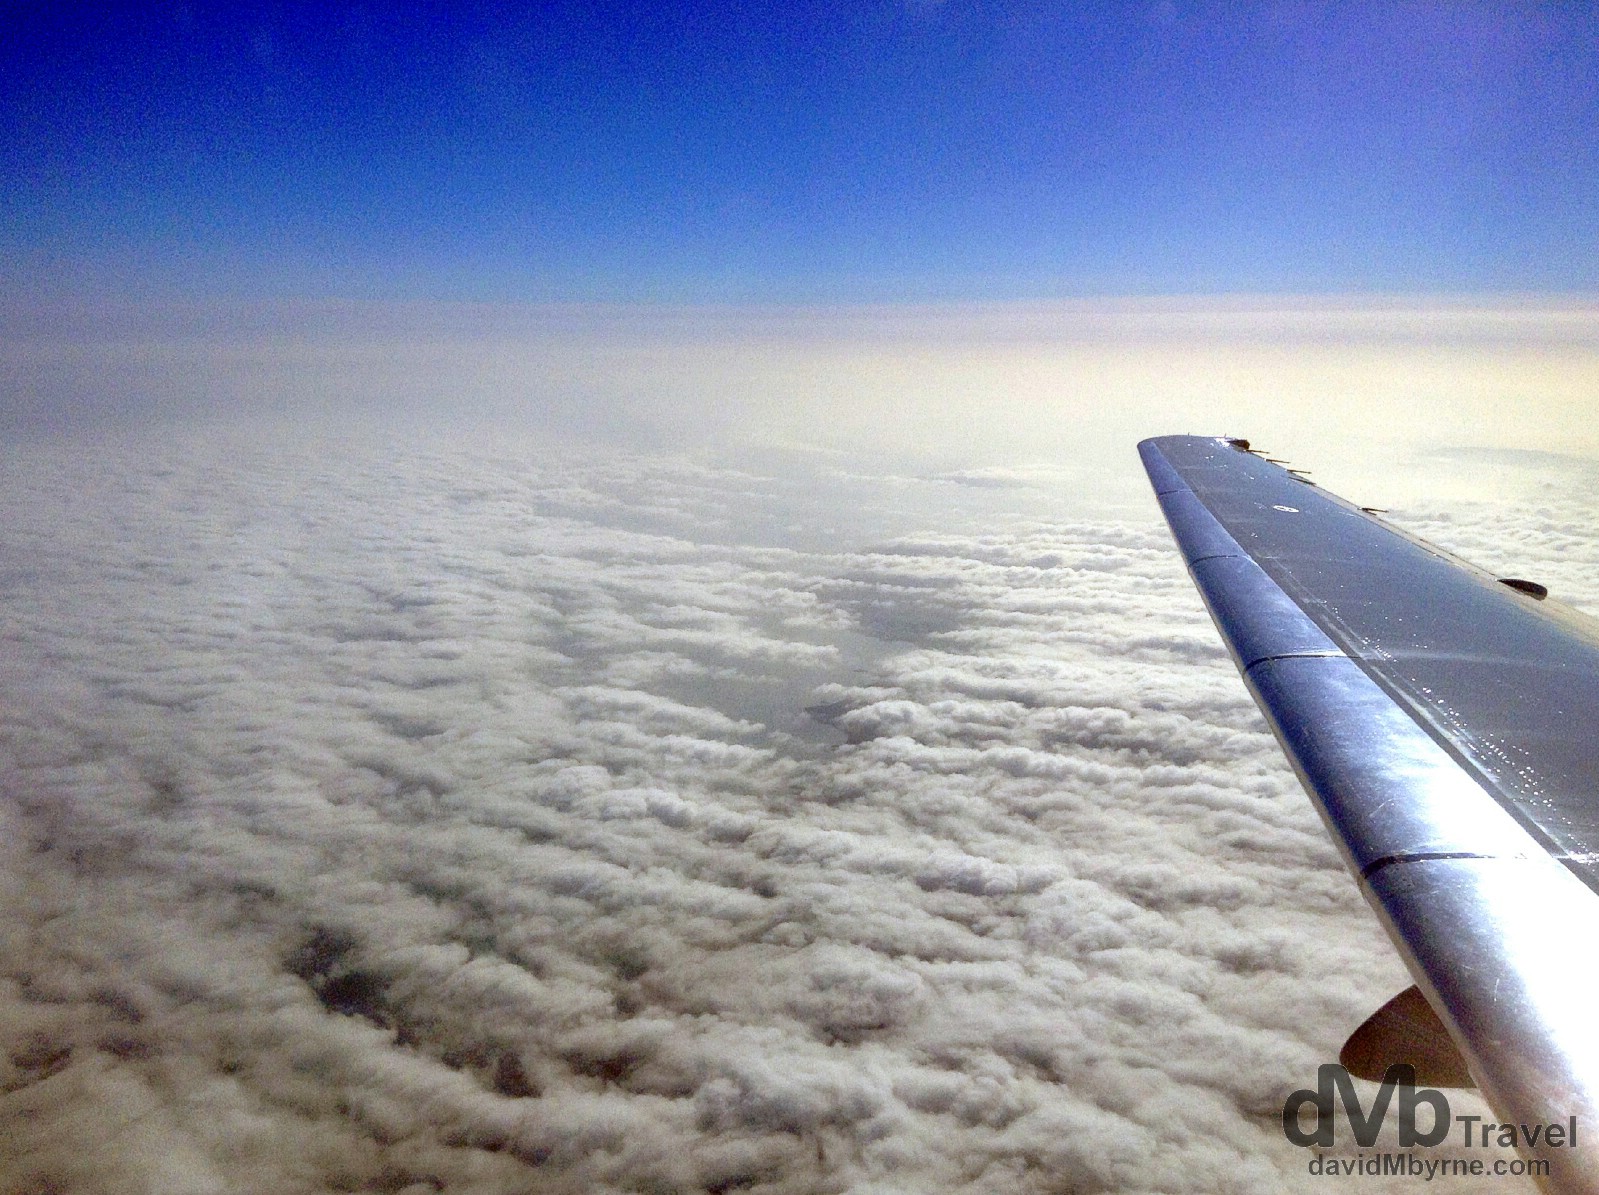 Shortly after take-off from Dublin Airport on flight SK0538 en route to Copenhagen, Denmark. March 12th, 2014 (iPod Touch v5)